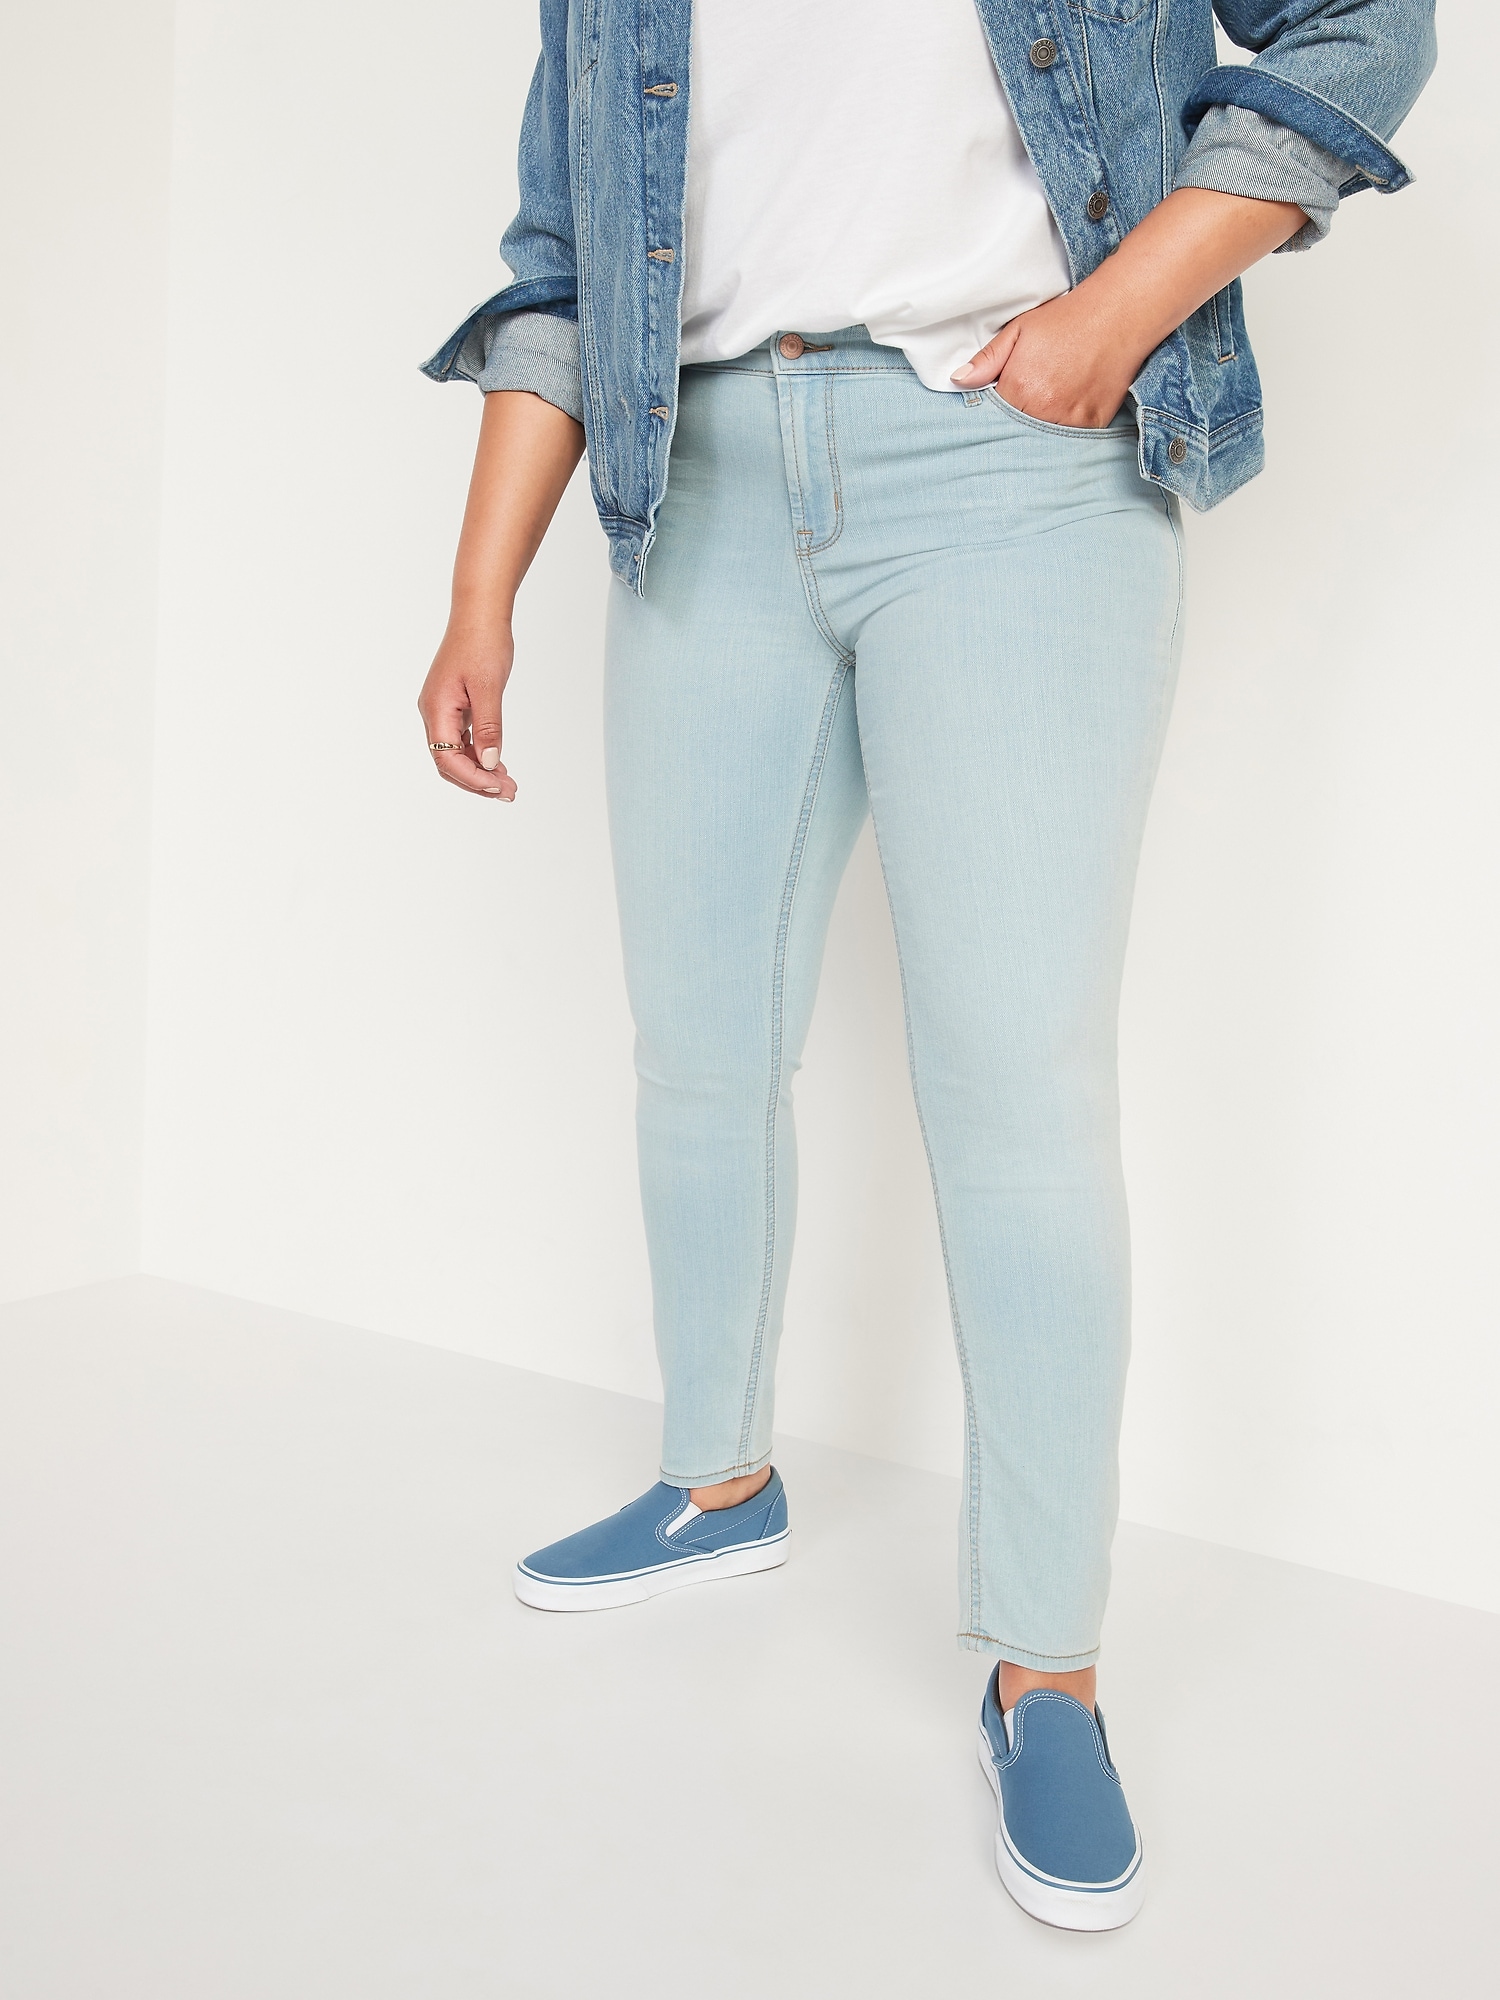 Mid-Rise Super Skinny Jeans for Women